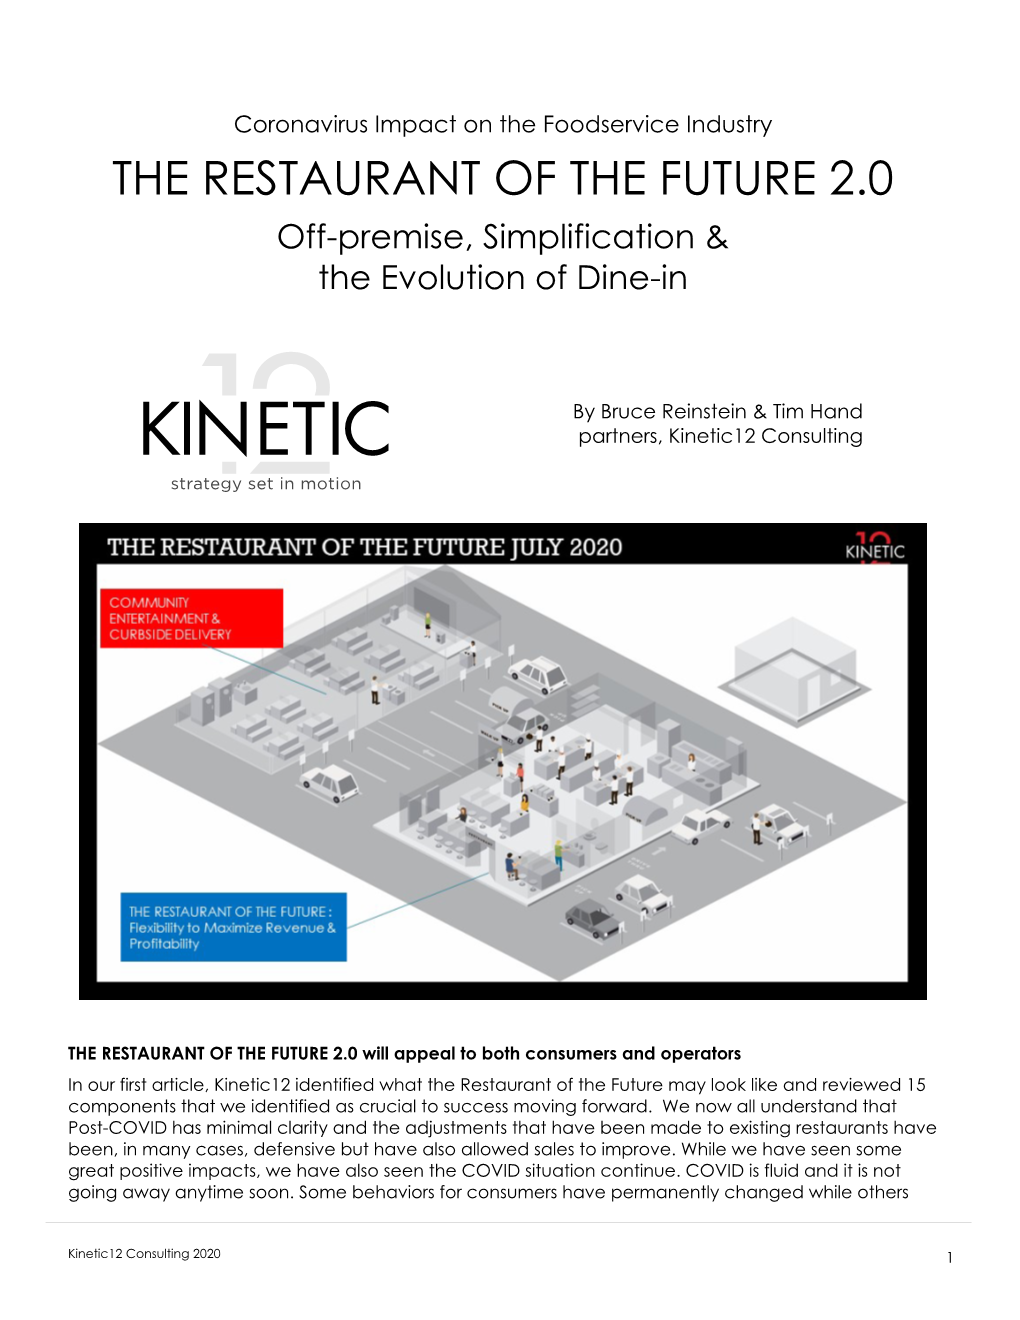 THE RESTAURANT of the FUTURE 2.0 Off-Premise, Simplification & the Evolution of Dine-In